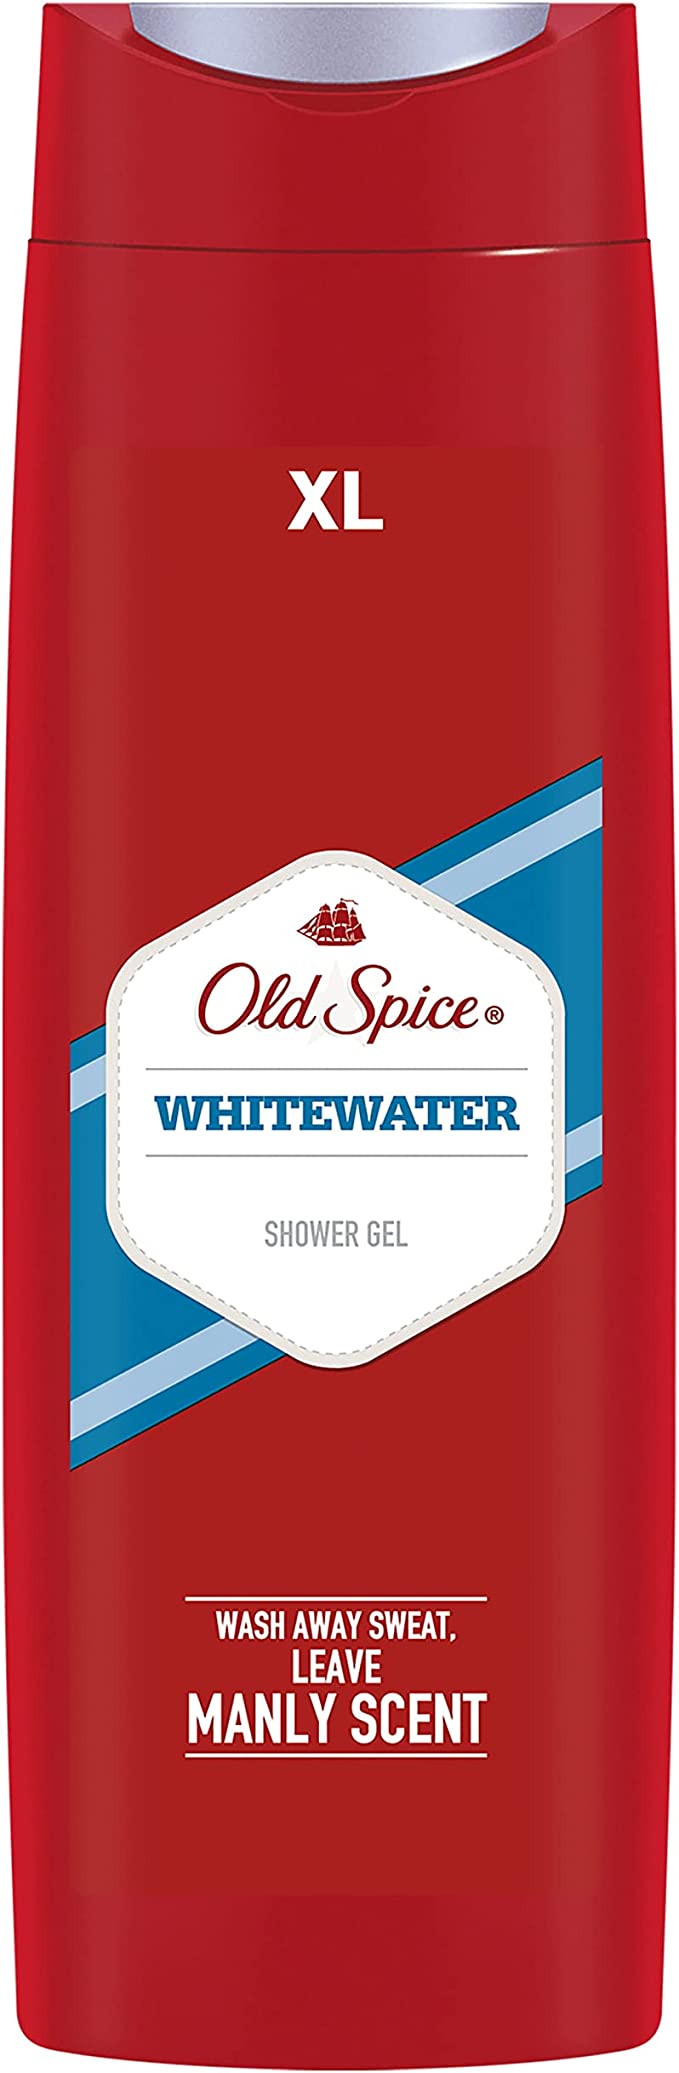 Old Spice WhiteWater Gel 400 ML - Neocart General Trading LLC